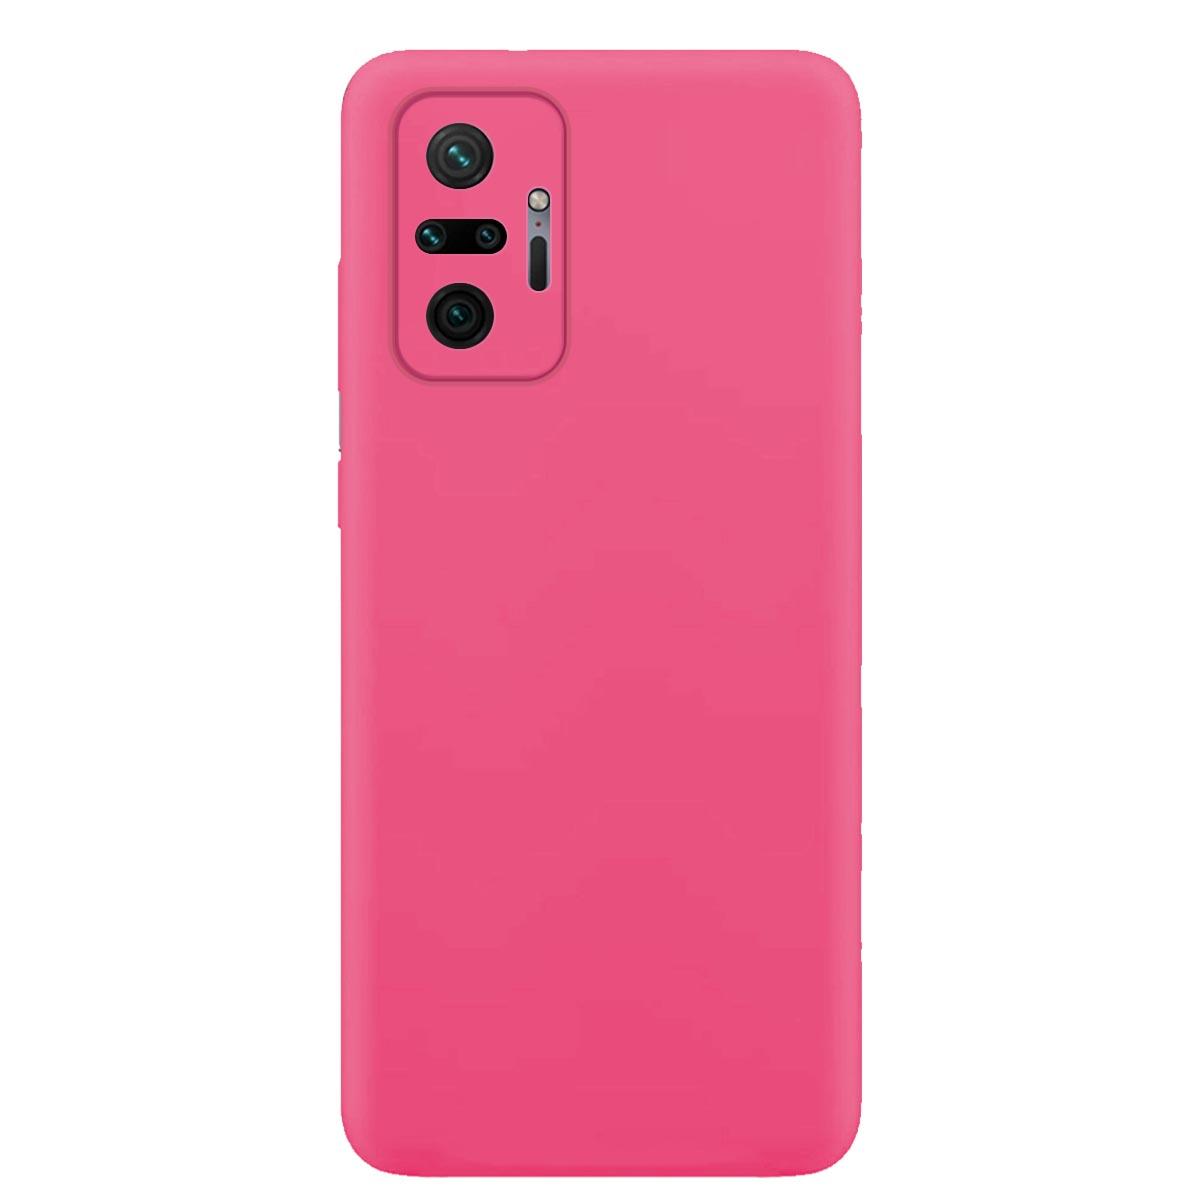 MTB MORE ENERGY Soft 10 Pro, Hot Pro 10 Xiaomi, Redmi Pink Case, Silikon Note Note Backcover, Max, Redmi